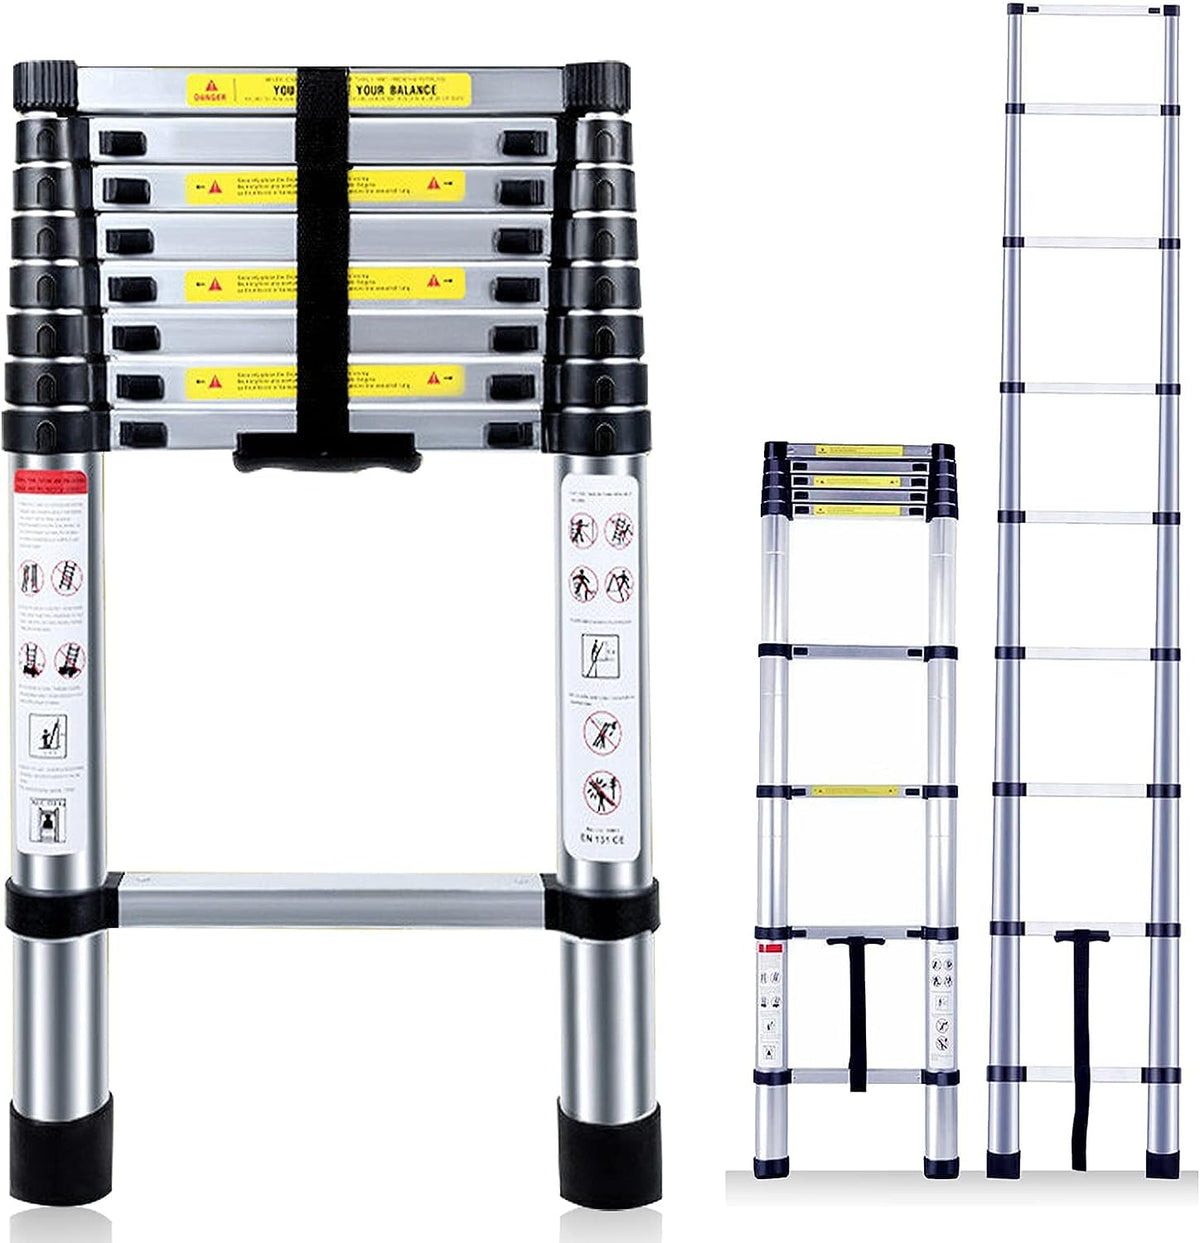 KriShyam® Telescopic Ladder, 4.6M/15ft Stainless Steel Lightweight Telescoping Ladders, Multi-Purpose Compact Extension Ladder for Indoor or Outdoor Working, 150Kg Capacity